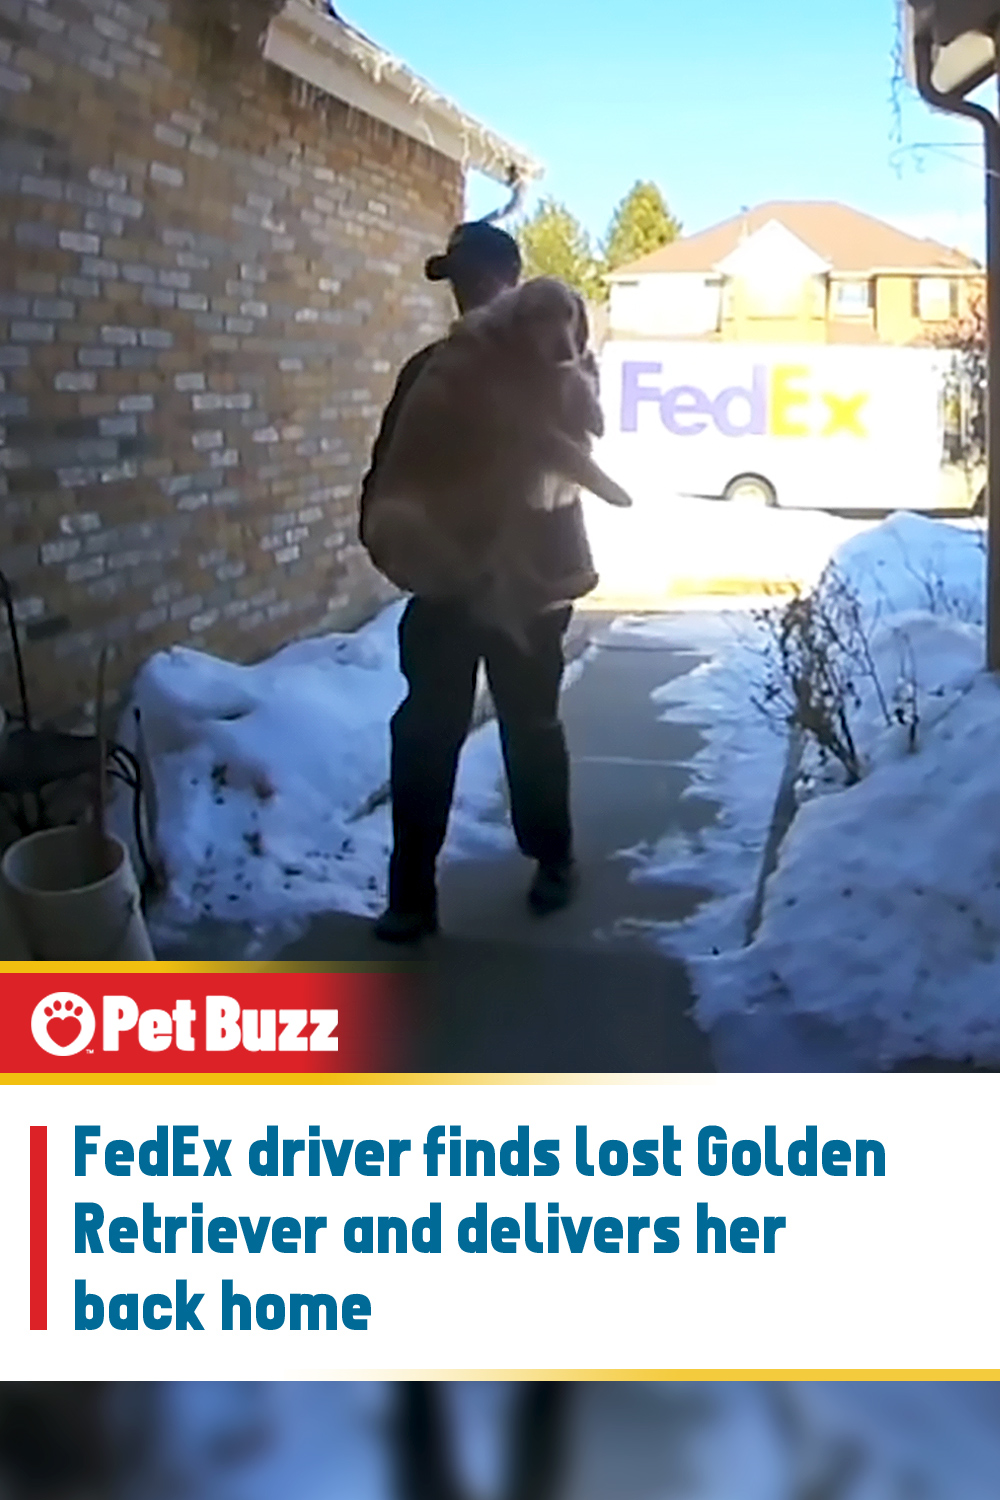 FedEx driver finds lost Golden Retriever and delivers her back home